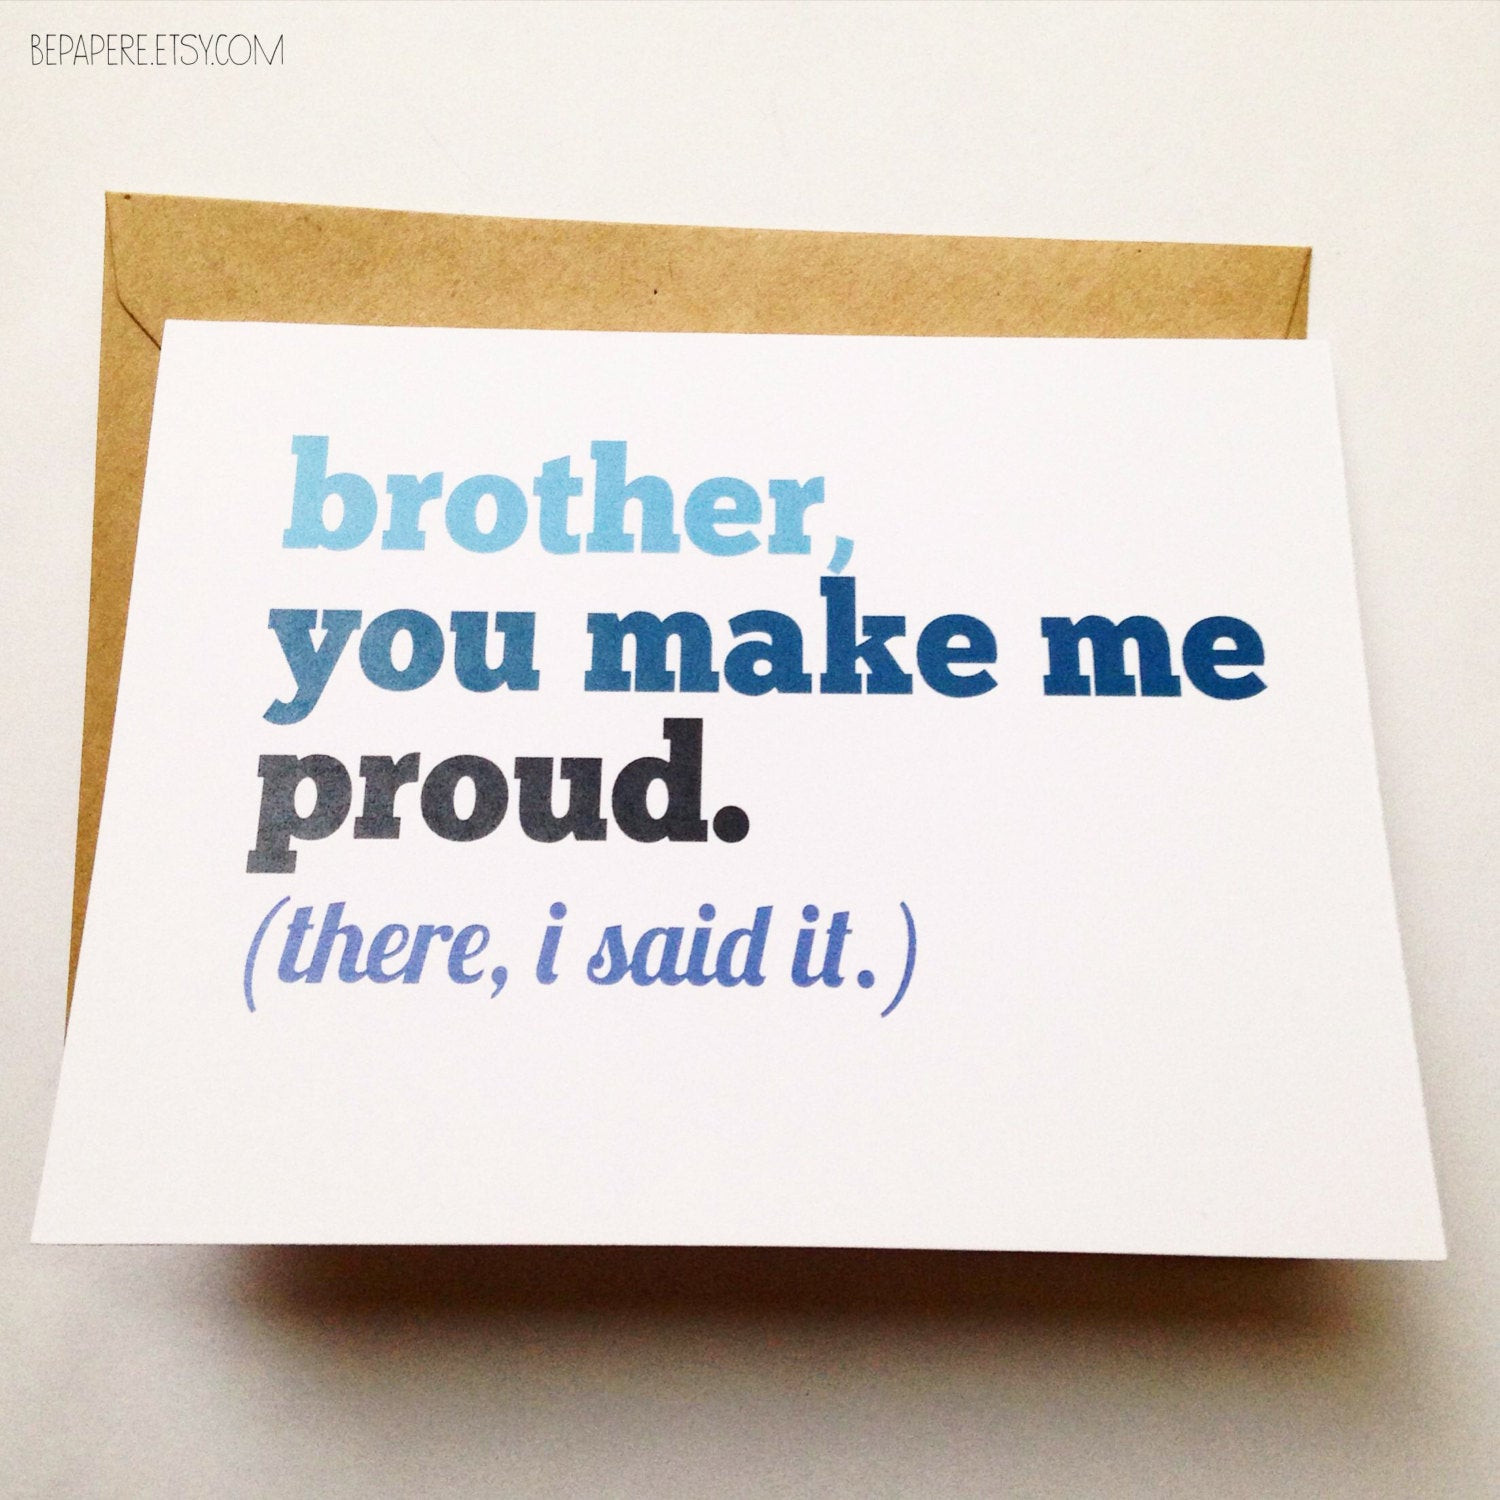 Funny Birthday Cards Brother
 Brother Card Brother Birthday Card Funny Card Card for